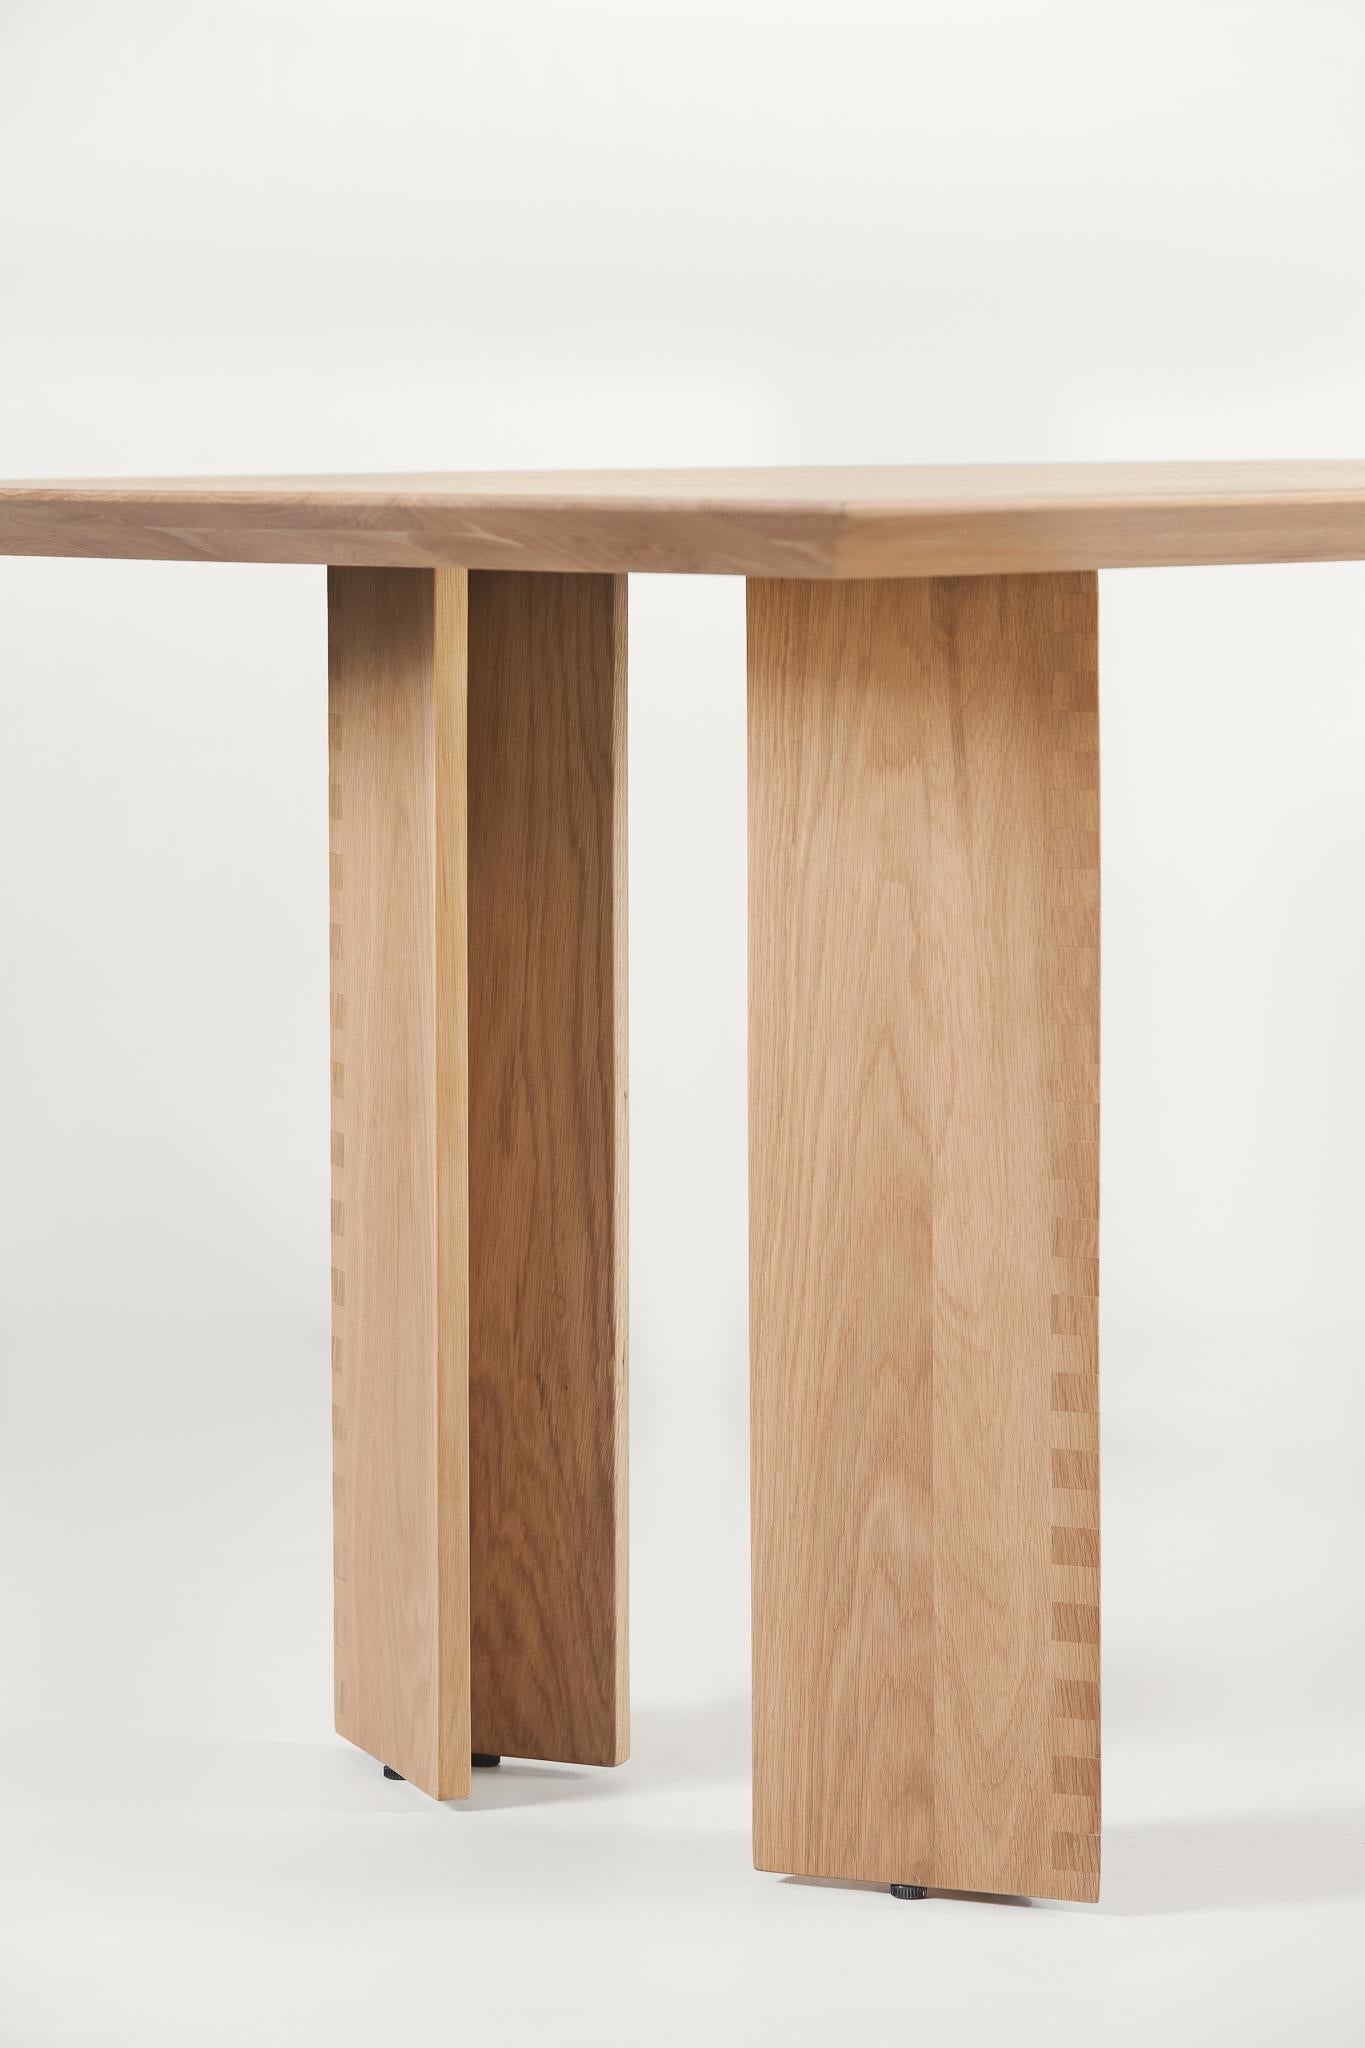 With the Angus table we wanted a sharp aesthetic that showcased traditional joinery methods.
 
Finger joints create a pattern of contrasting wood-grain along the full height of each leg, with the acutely angled slabs allowing space for shadow to